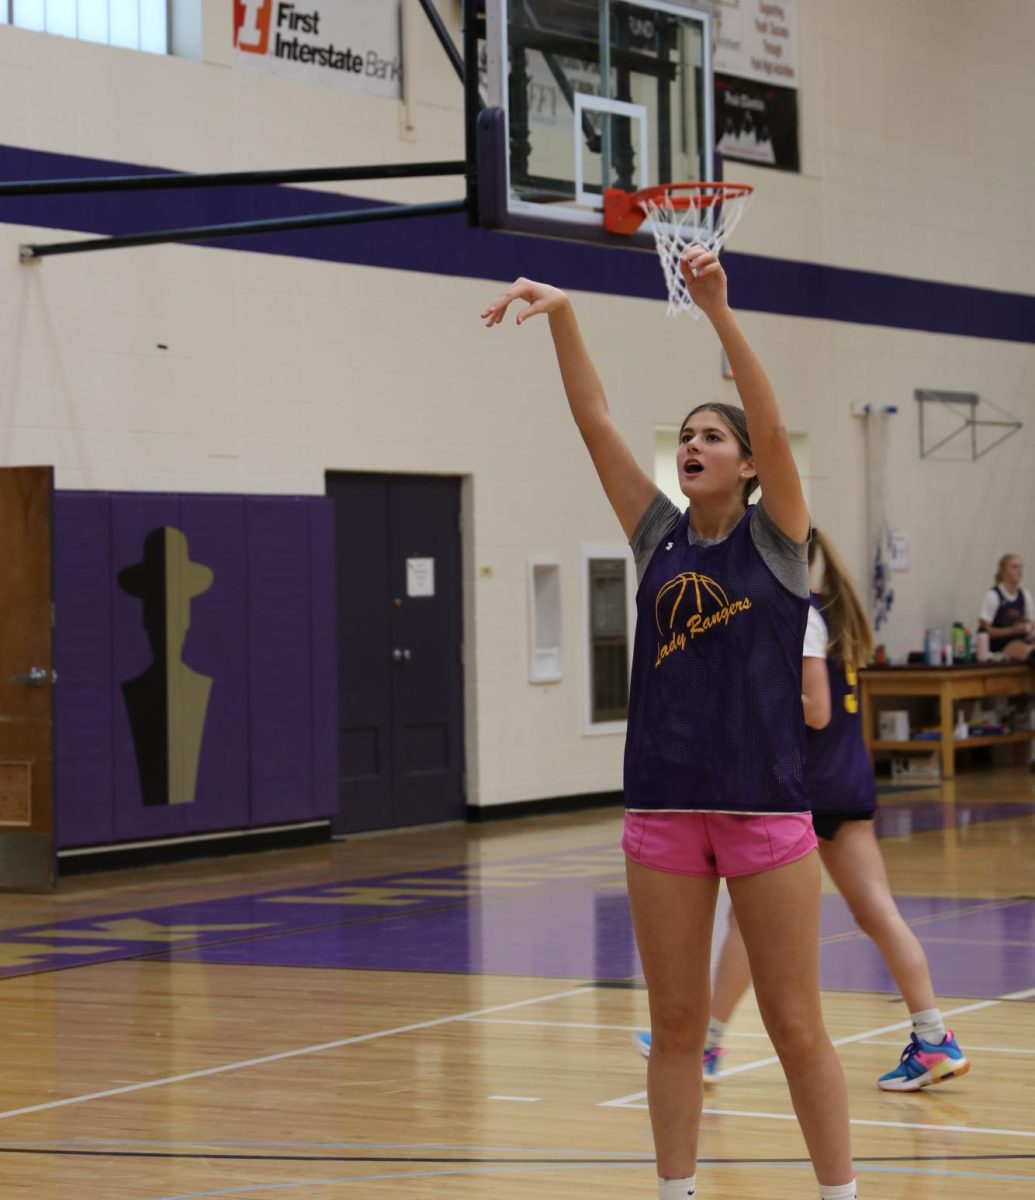 Sophomore+Chase+Vermillion+pauses+during+her+shot+follow-through+at+basketball+practice%2C+Tuesday.